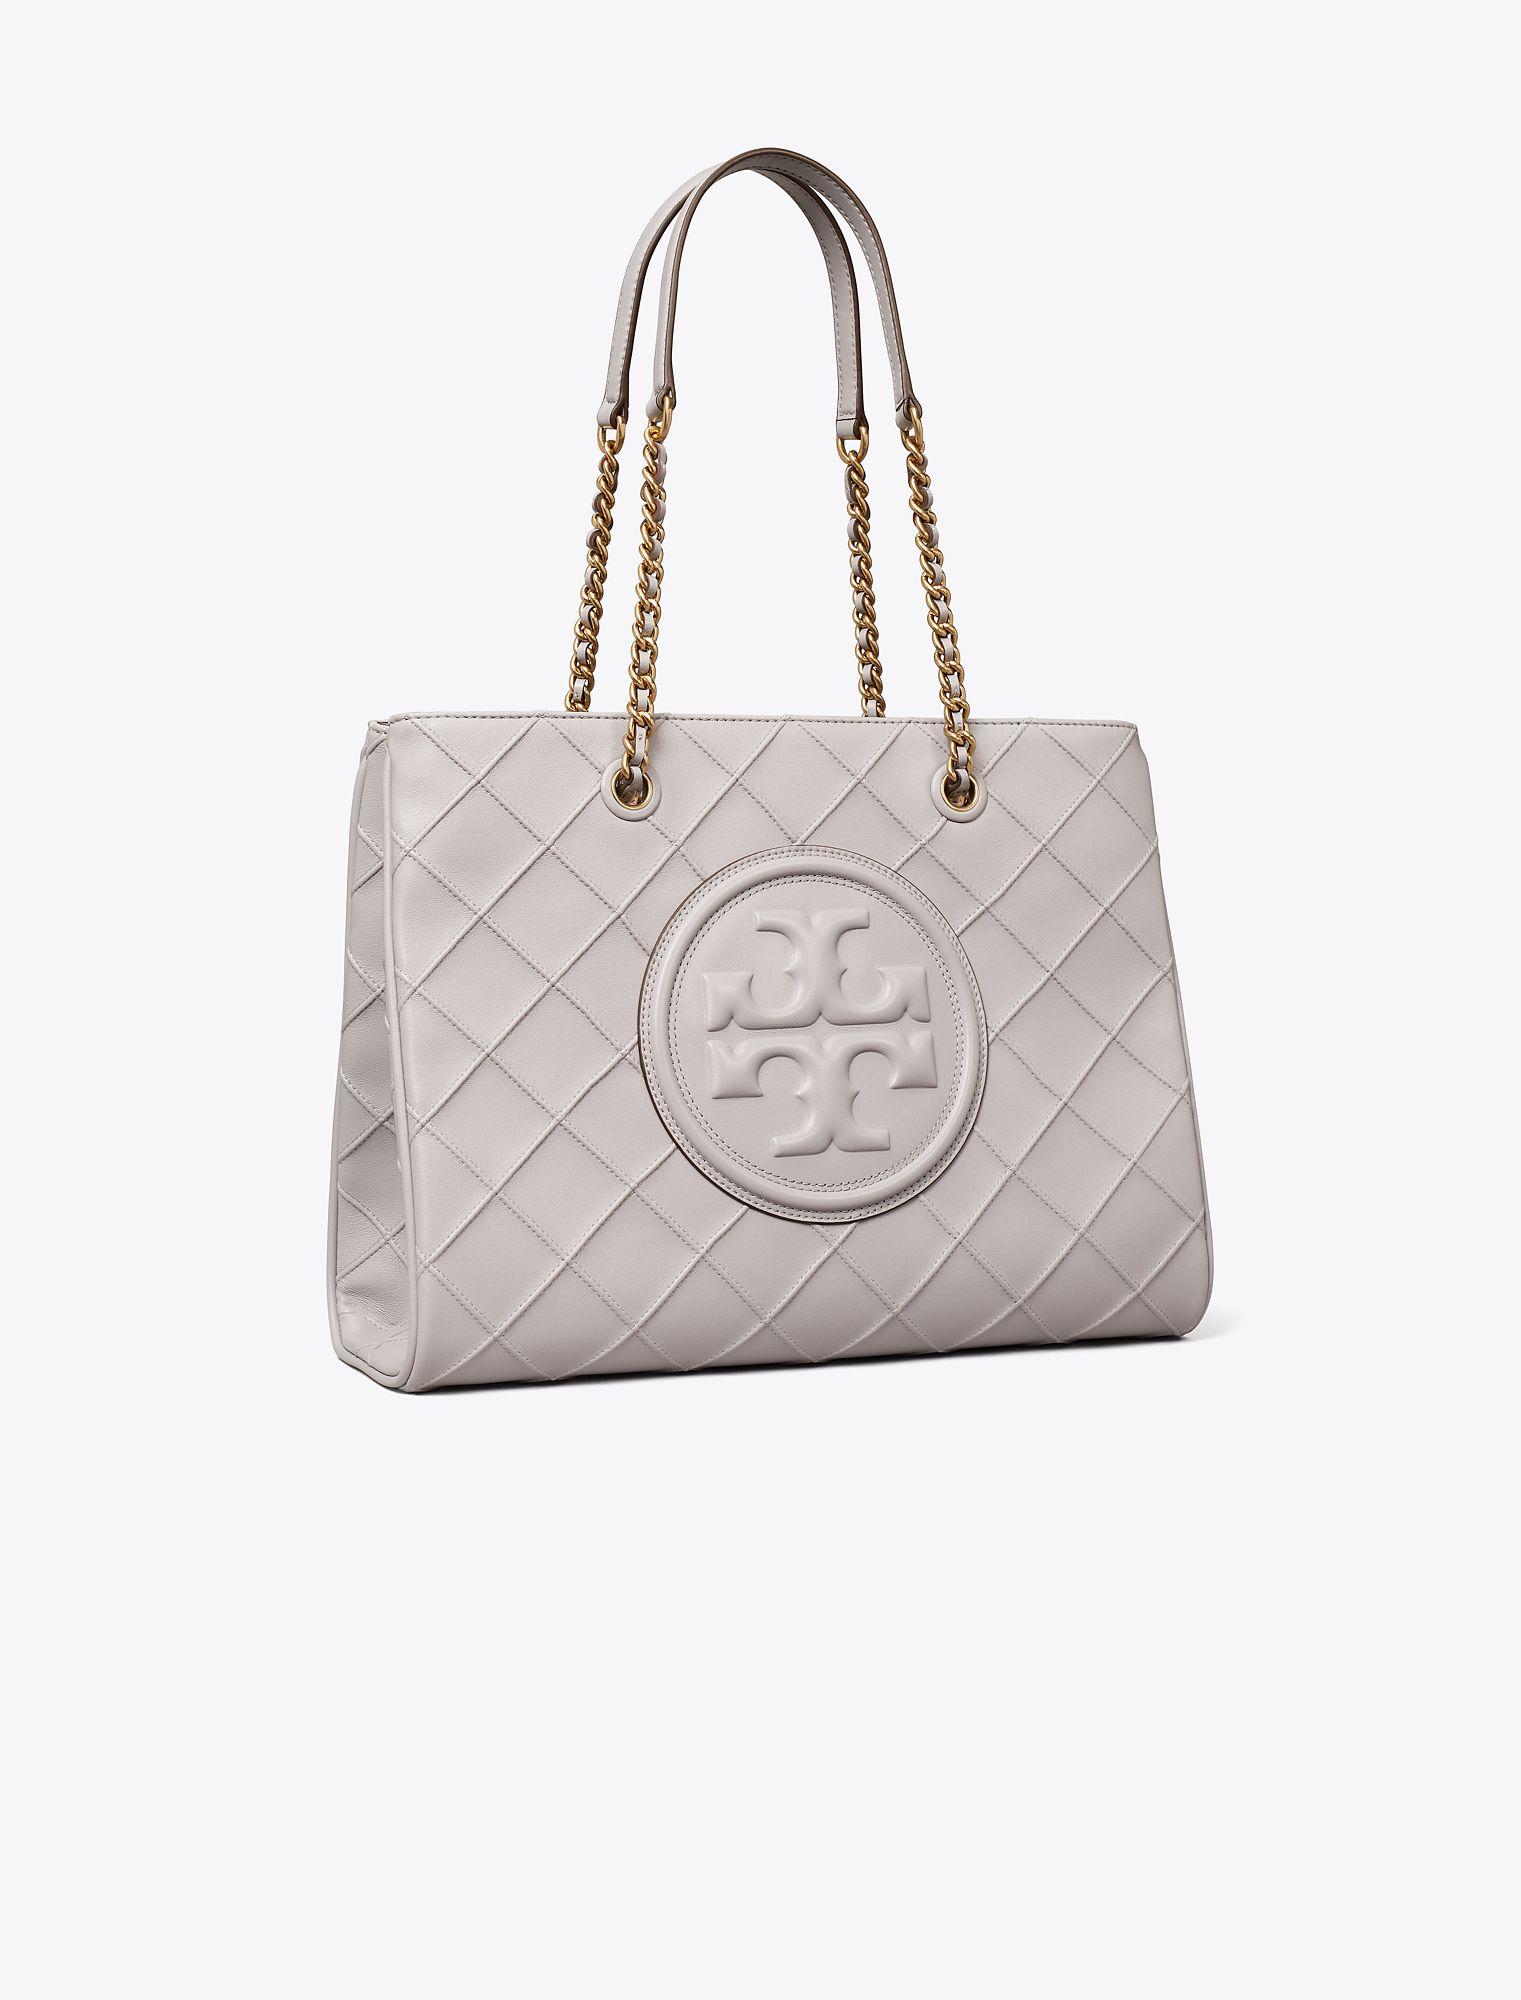 Tory Burch Fleming Soft Chain Tote in White | Lyst